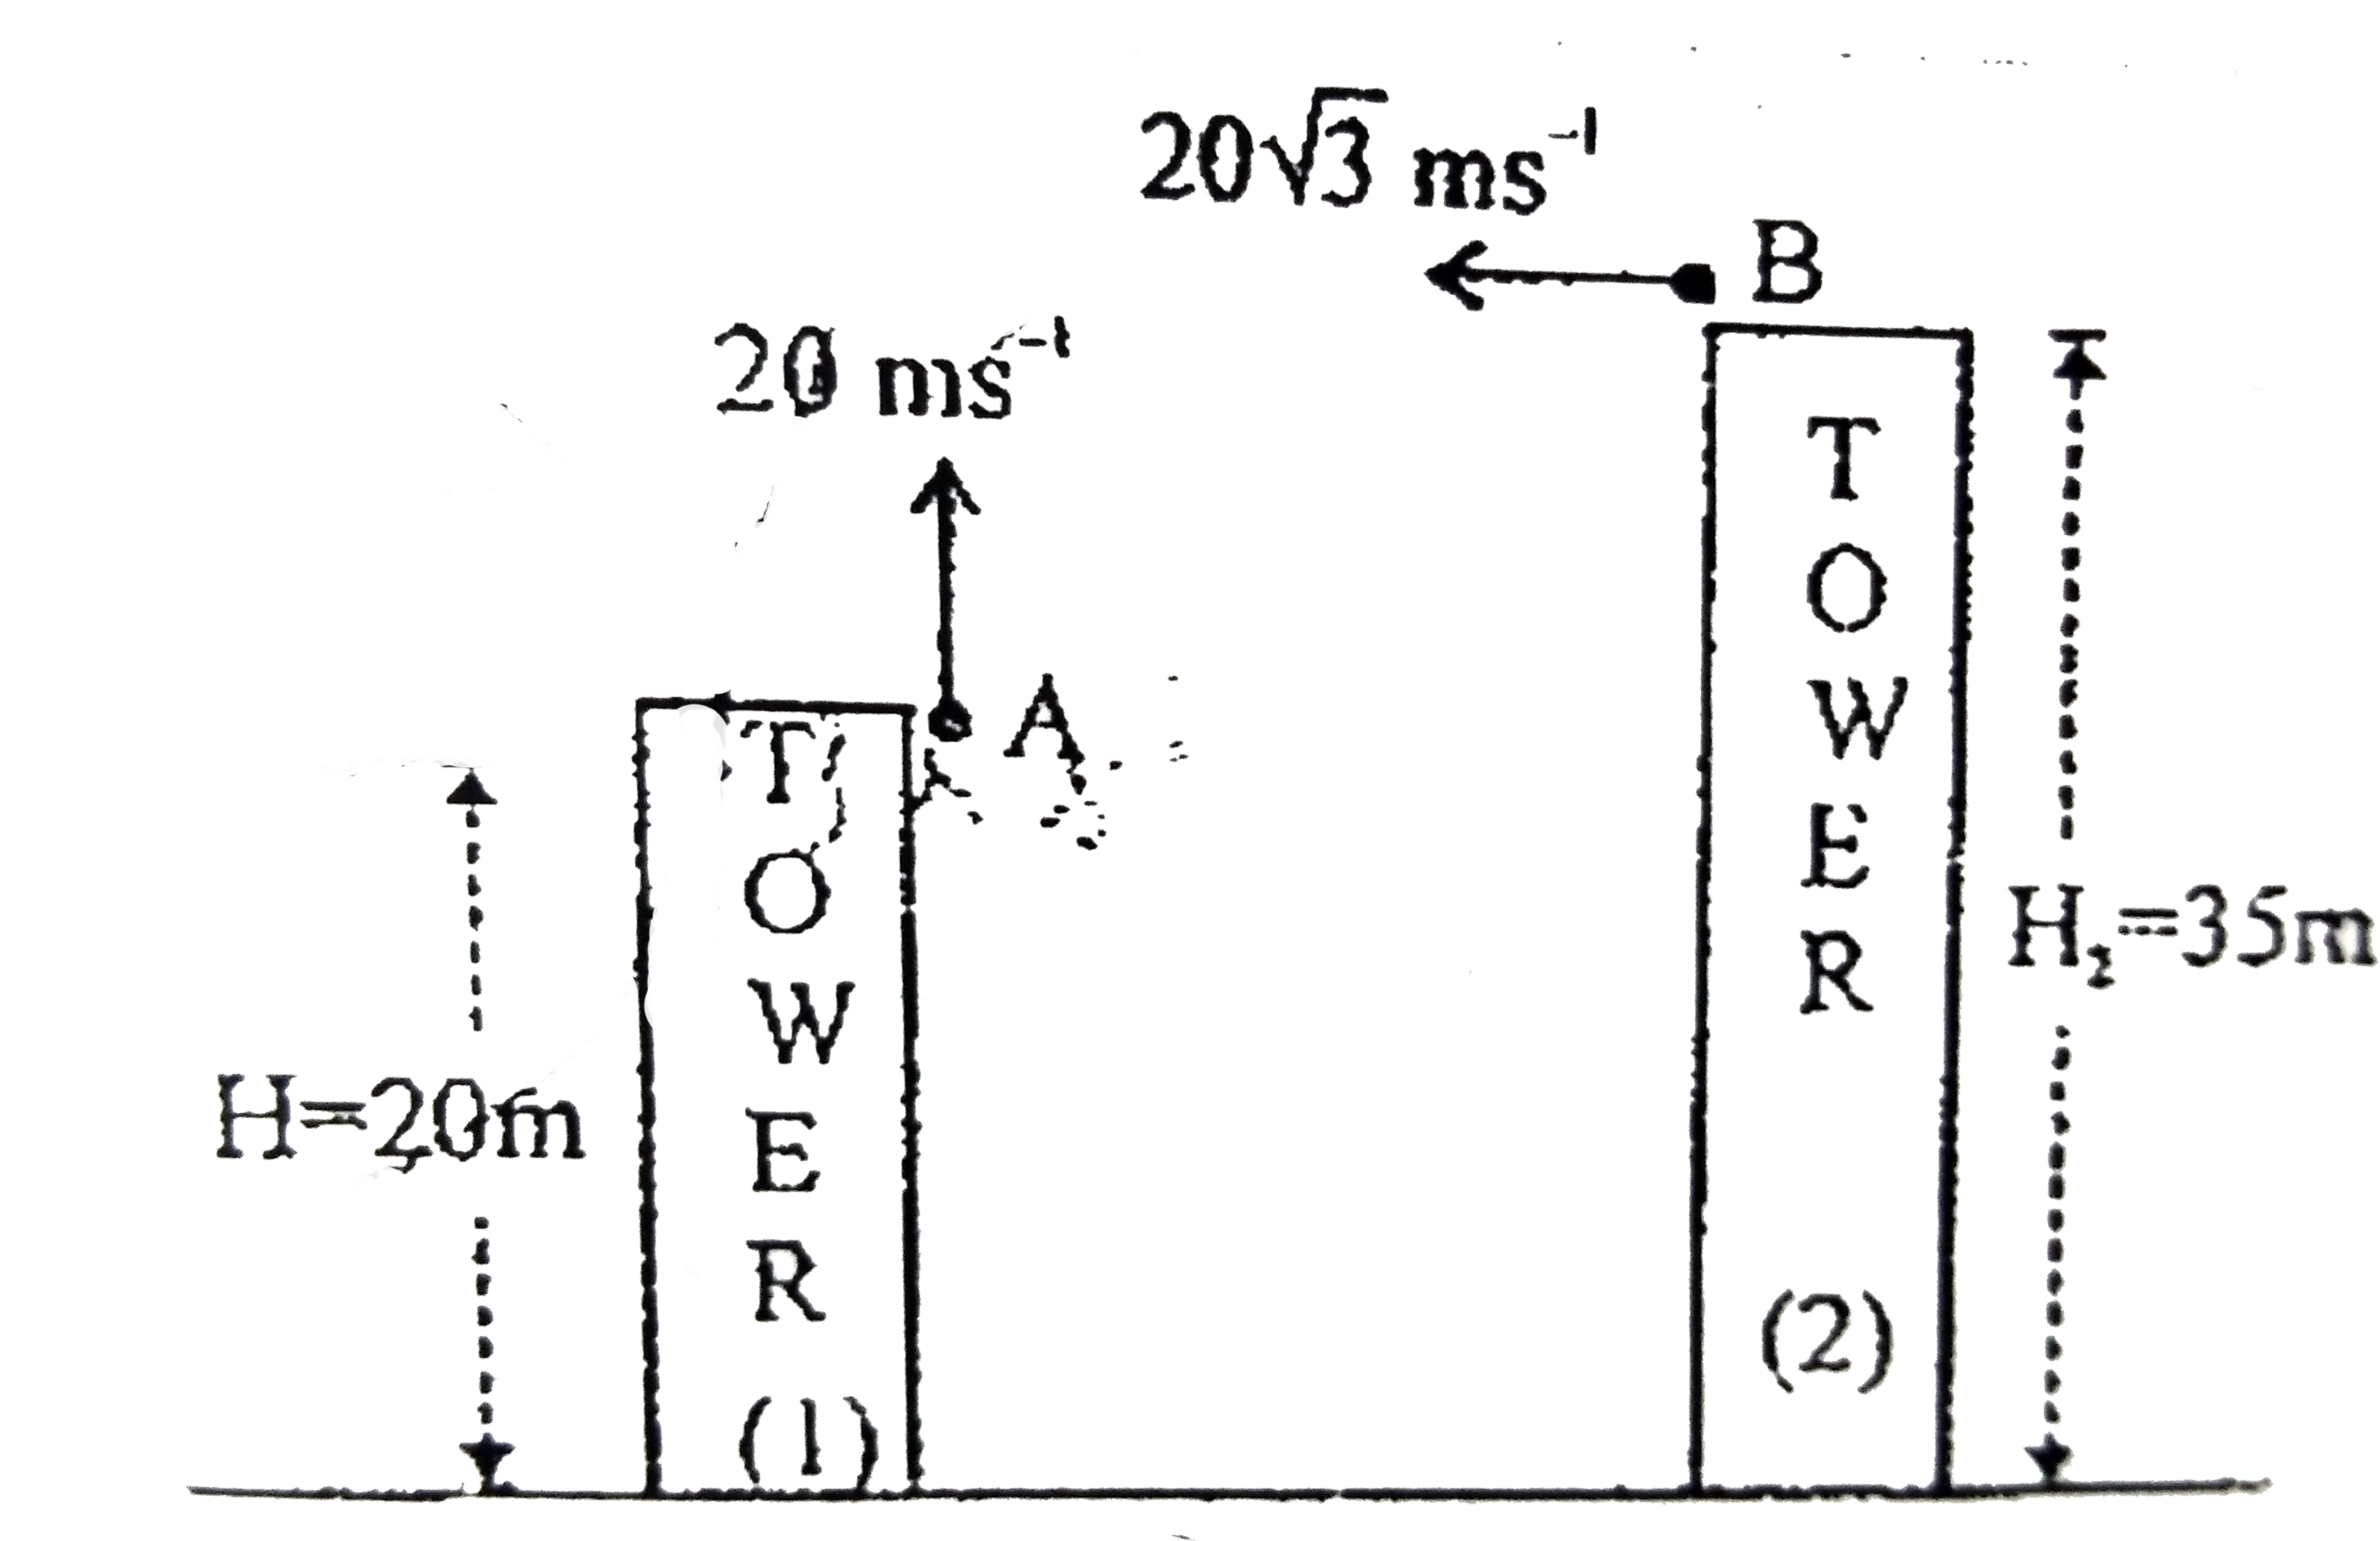 Two particles are projected simultaneously from the top of the towers as shown. Find the distance between the towers if they collide in mid air during their flight.